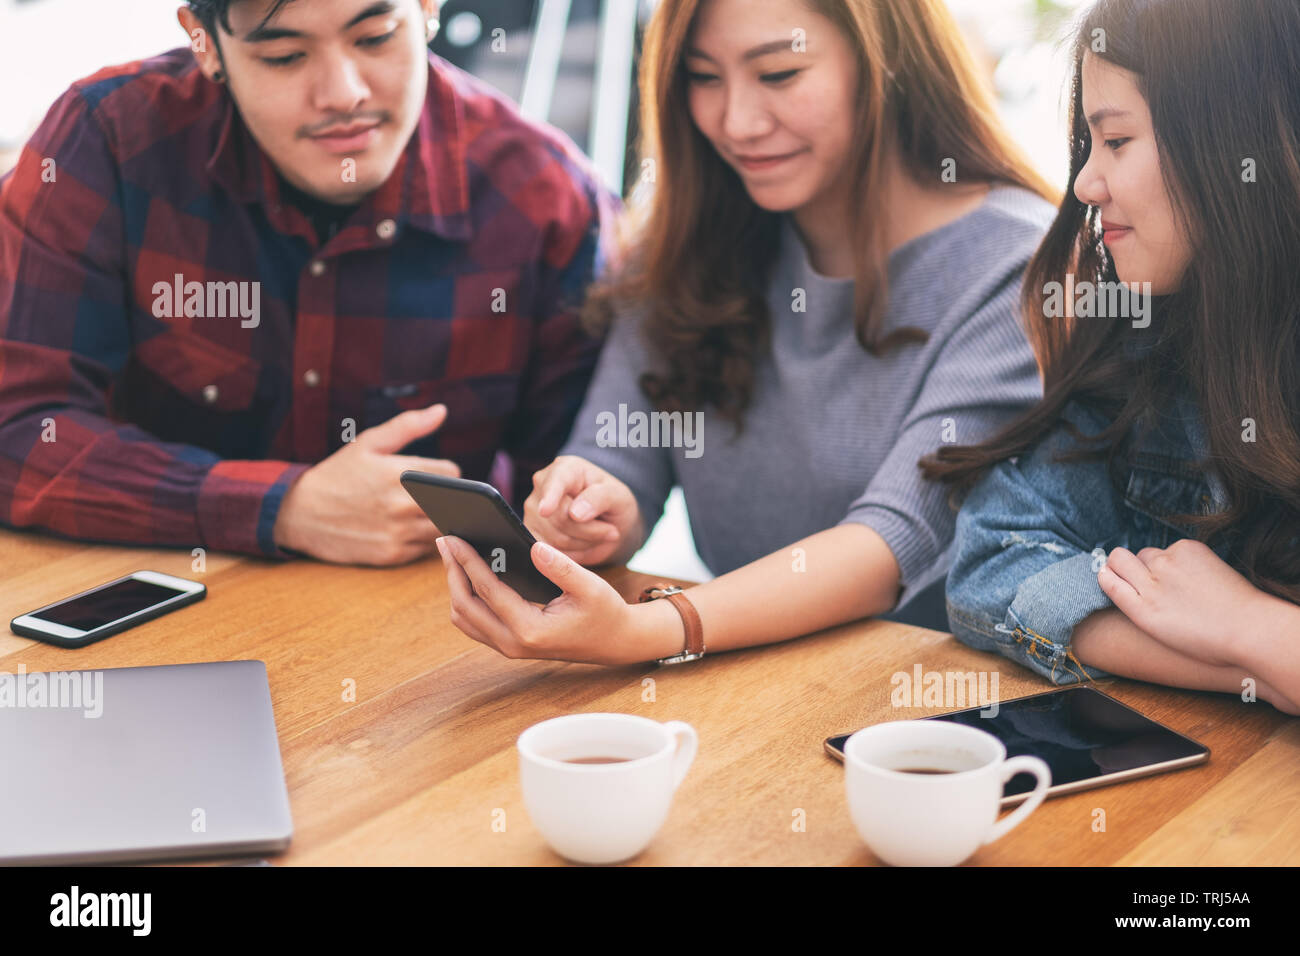 Three young asian people using and looking at the same mobile phone together Stock Photo